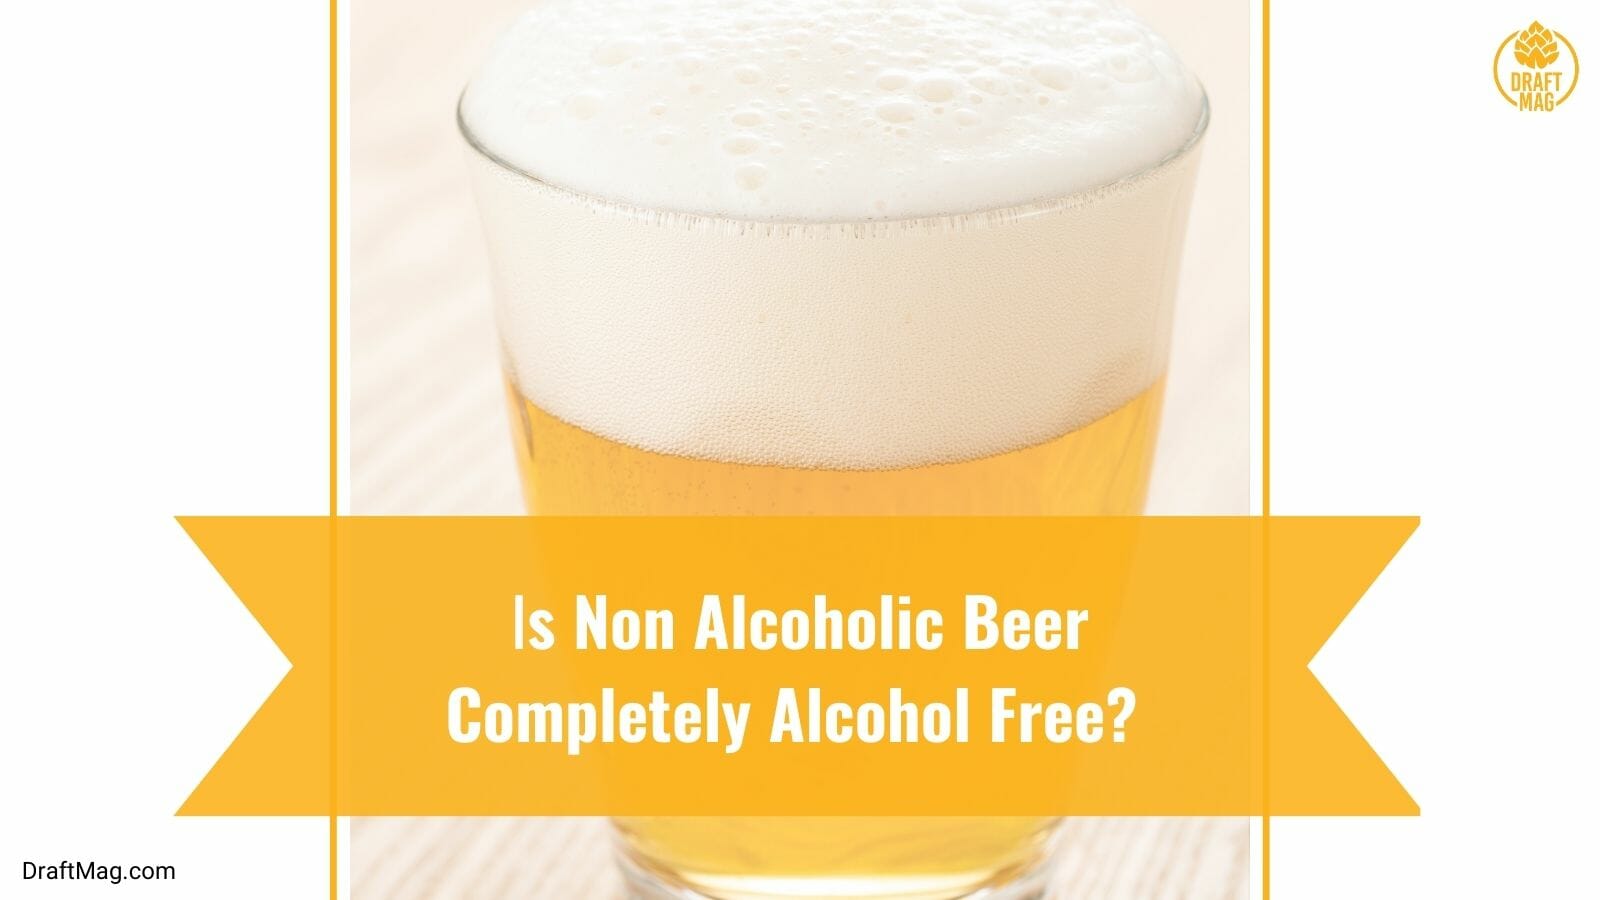 Is Non Alcoholic Beer Completely Alcohol Free